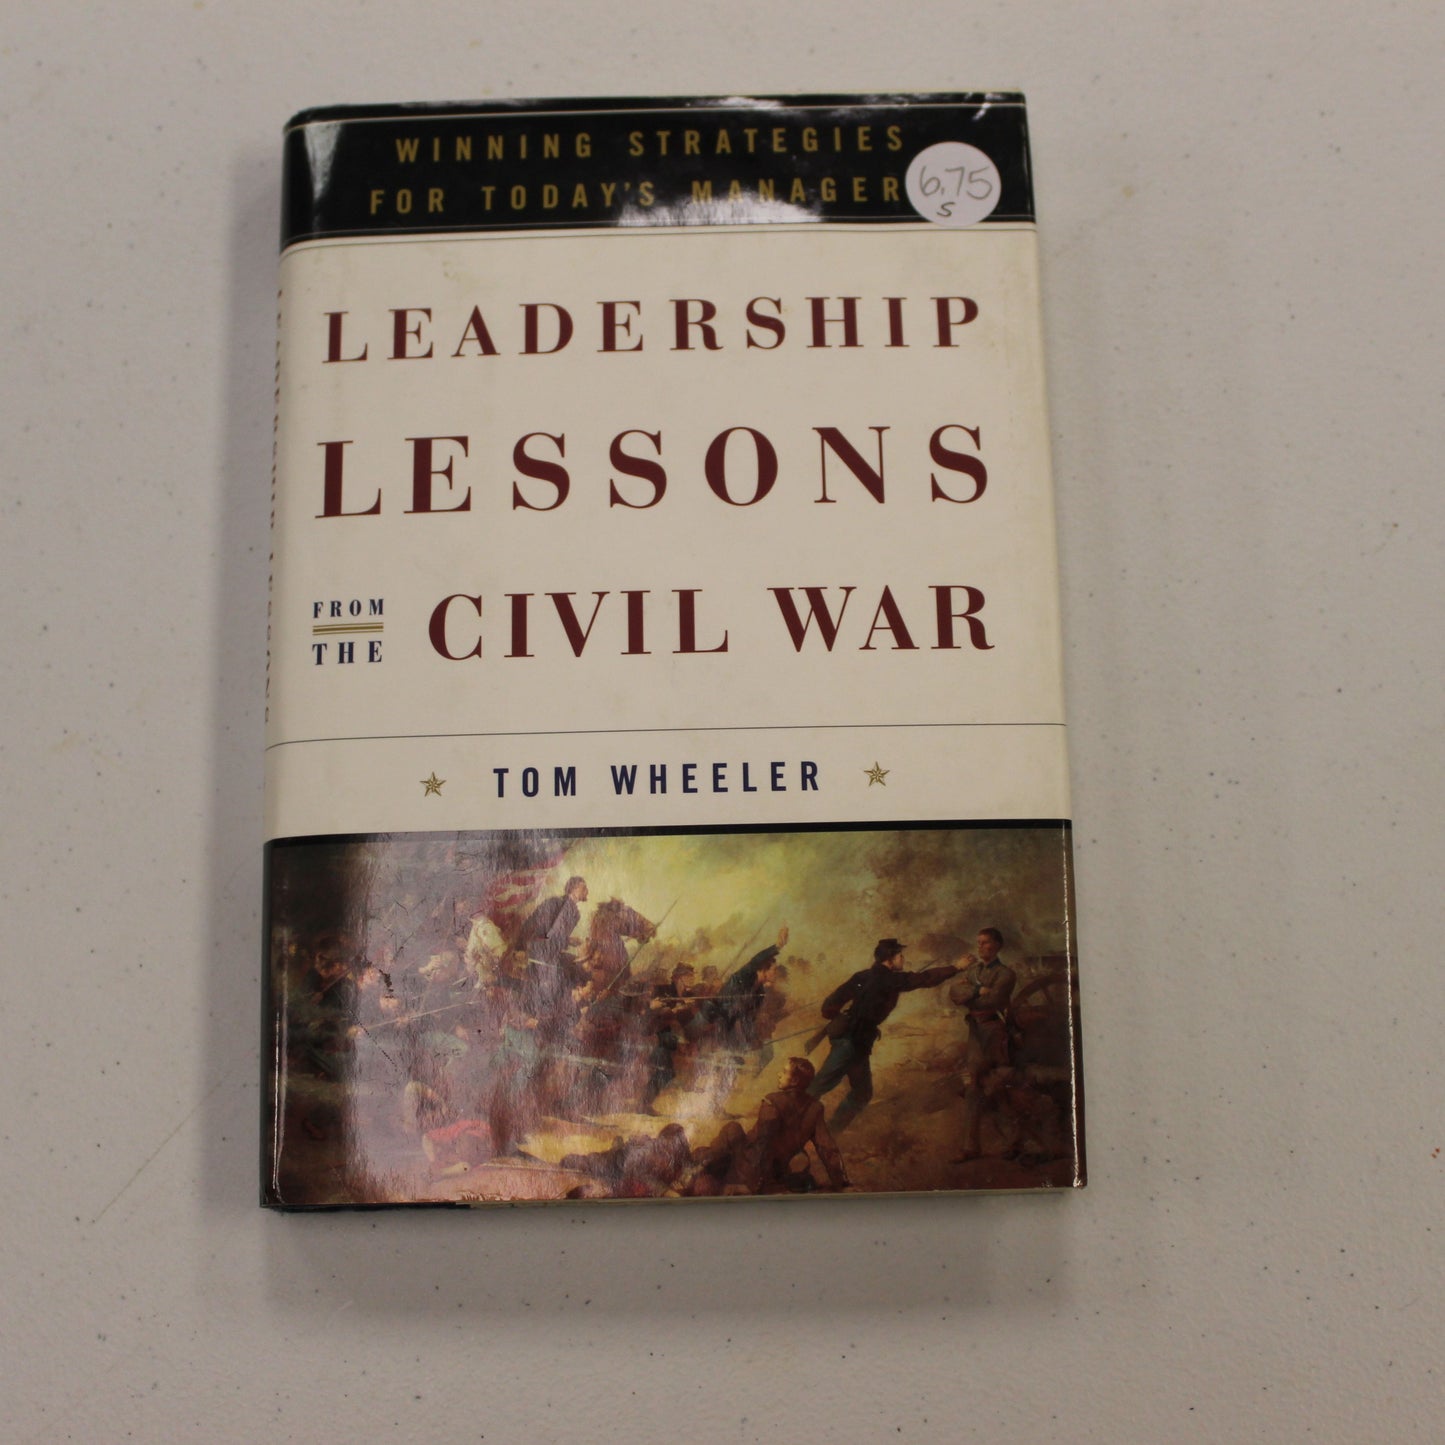 LEADERSHIP LESSONS FROM THE CIVIL WAR